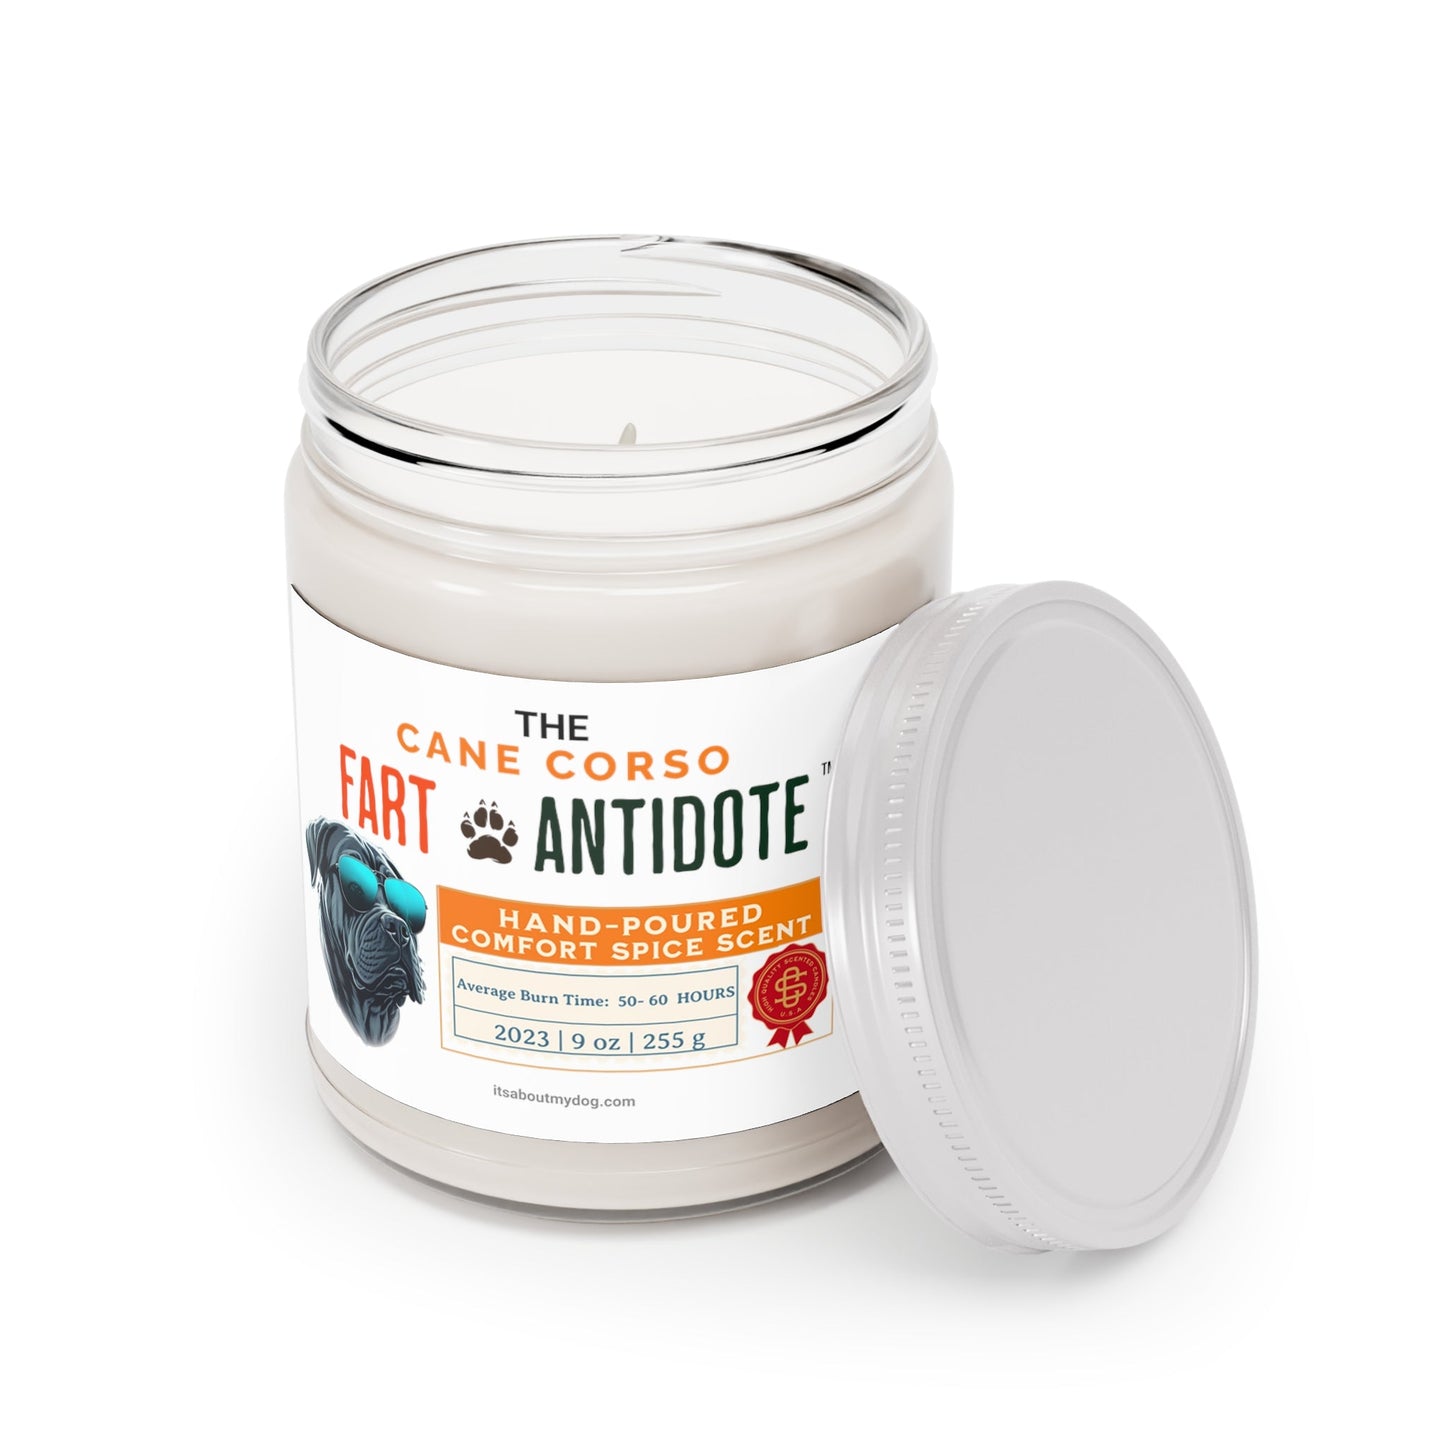 Cane Corso Dog Fart Antidote Scented Candles, 9oz , Cane Corzo27.99-(FREE Delivery) Shop now at itsaboutmydog.com, Cane Corso Collar, Cane Corso Cup, cane corso Dad, cane corso Gift, cane corso gifts, cane corso Mom, Cane Corso Portrait, Cane Corso- 9oz Scented Candles, carne corzo